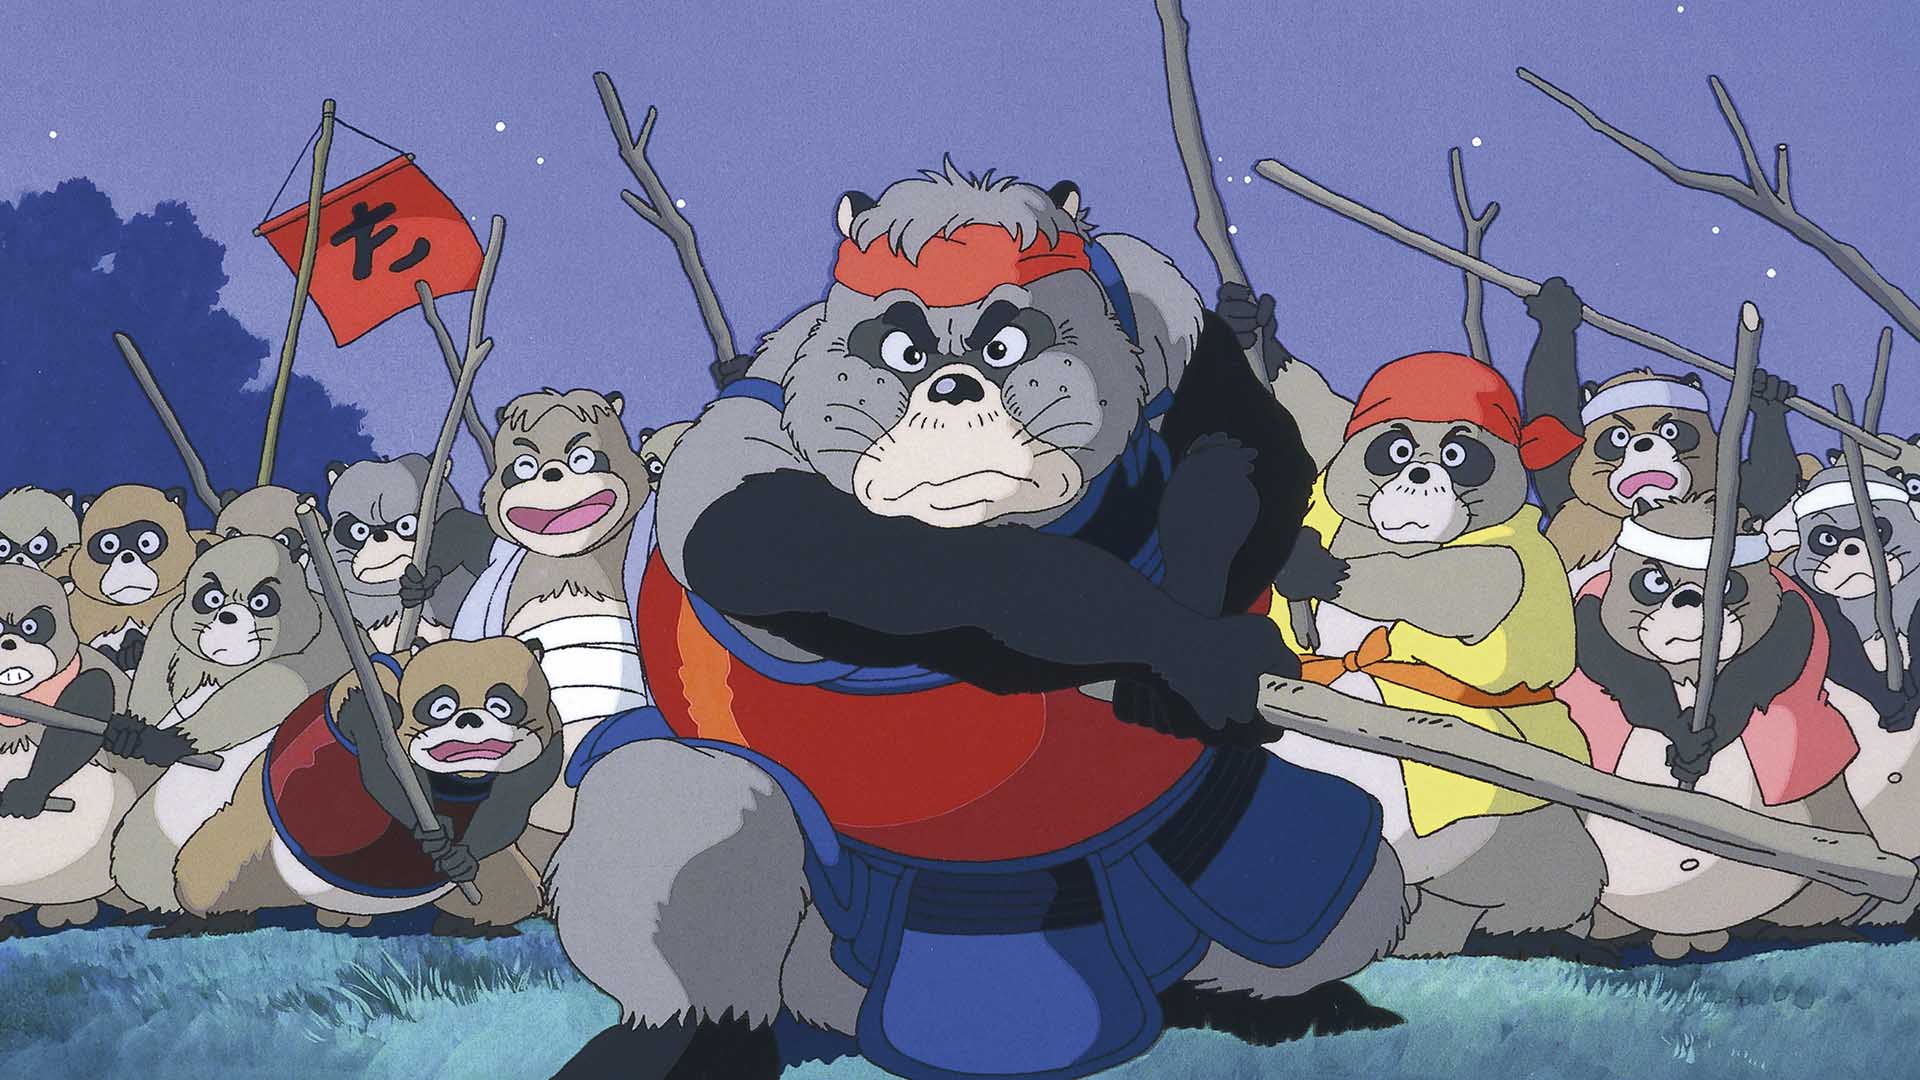 A List of All the Studio Ghibli Movies, Ranked